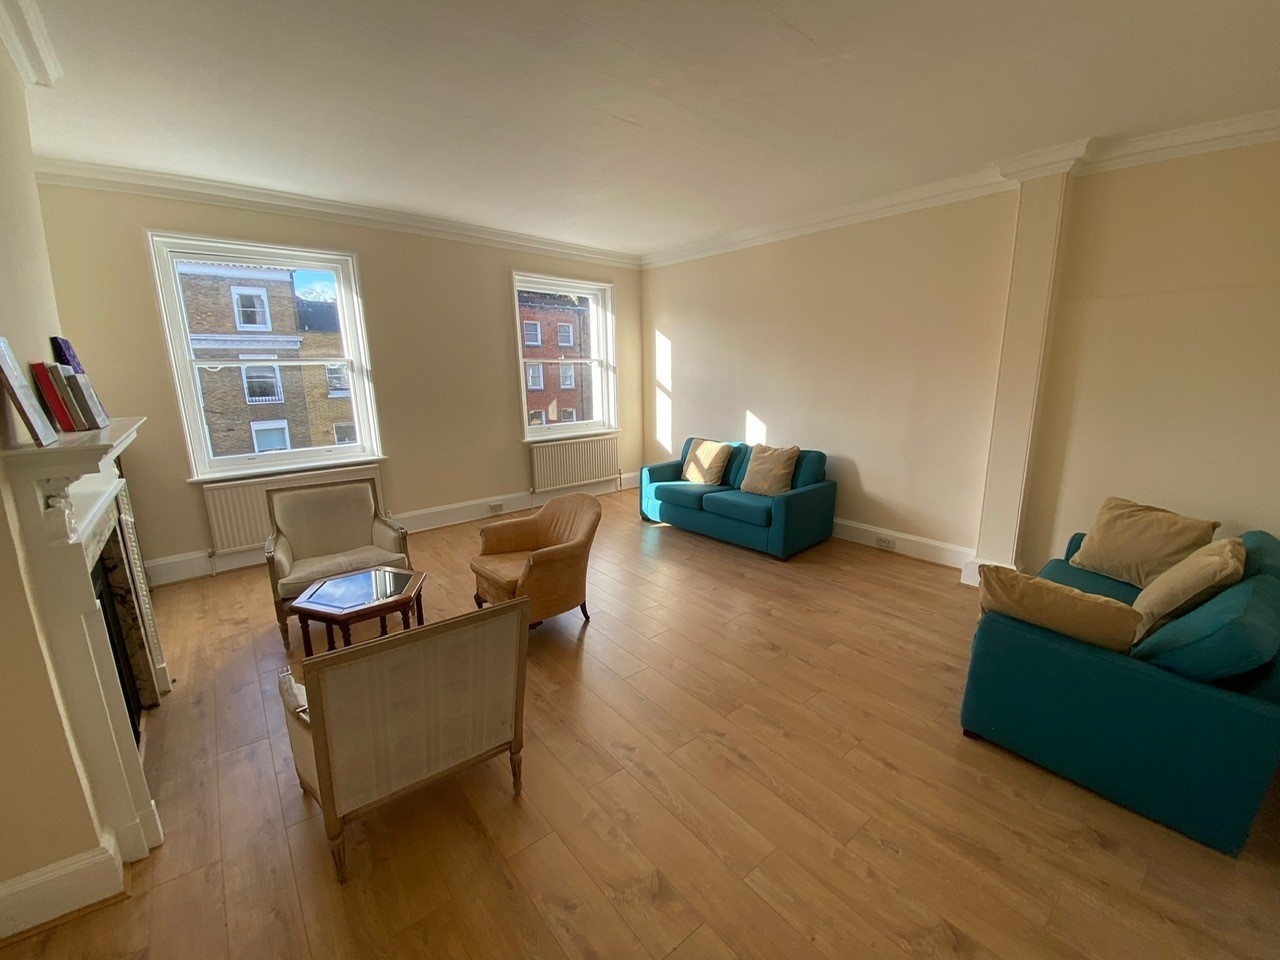 Renting a shared apartment for £3,000 in Westminster? Welcome to the UK's property market chaos. Limited space, dated amenities, and hefty deposits now available for renting.